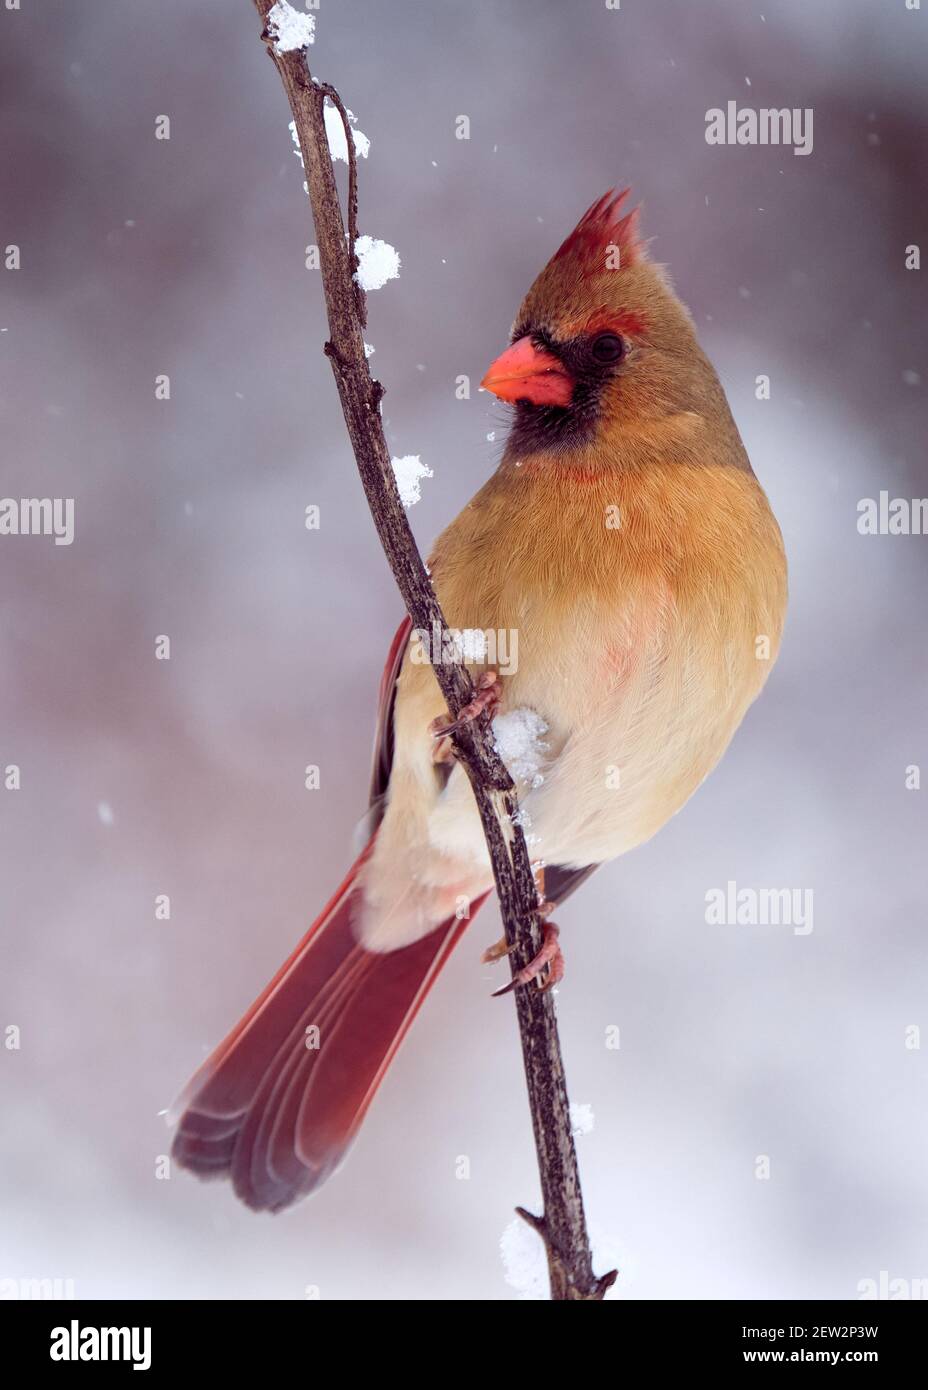 Northern cardinal female perched on a branch sideways against a snowy background Stock Photo